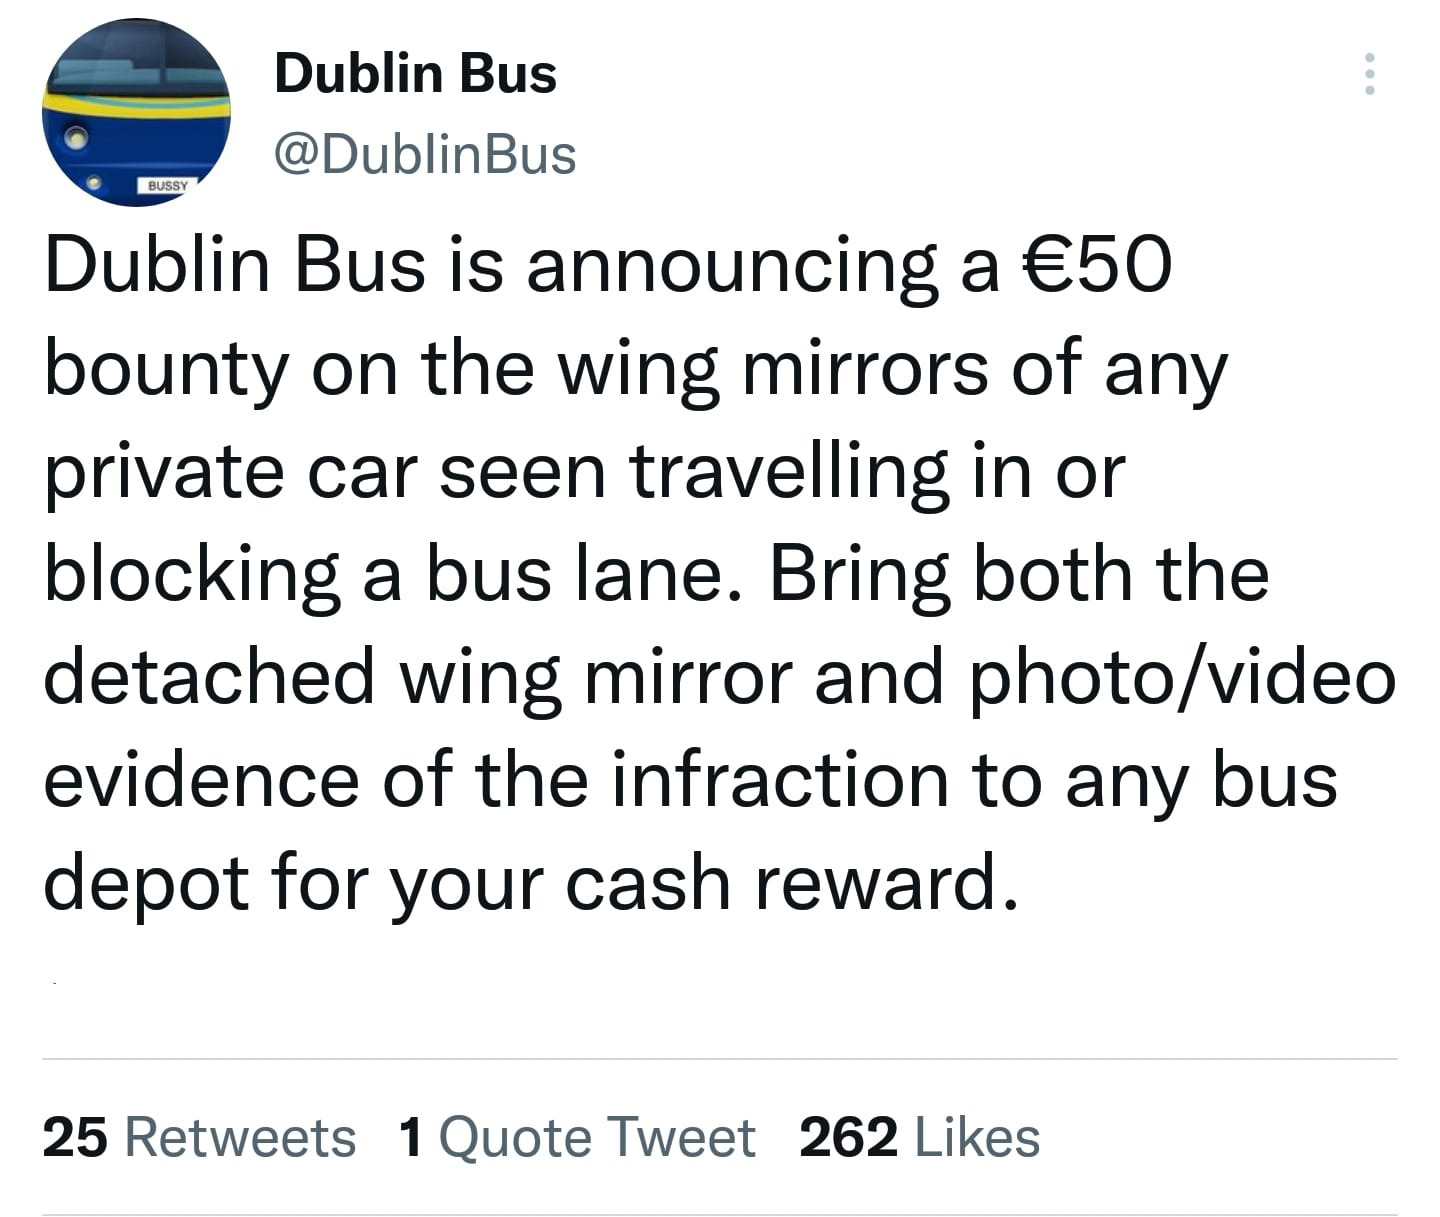 funny tweets - angle - Dublin Bus Bussy Dublin Bus is announcing a 50 bounty on the wing mirrors of any private car seen travelling in or blocking a bus lane. Bring both the detached wing mirror and photovideo evidence of the infraction to any bus depot f